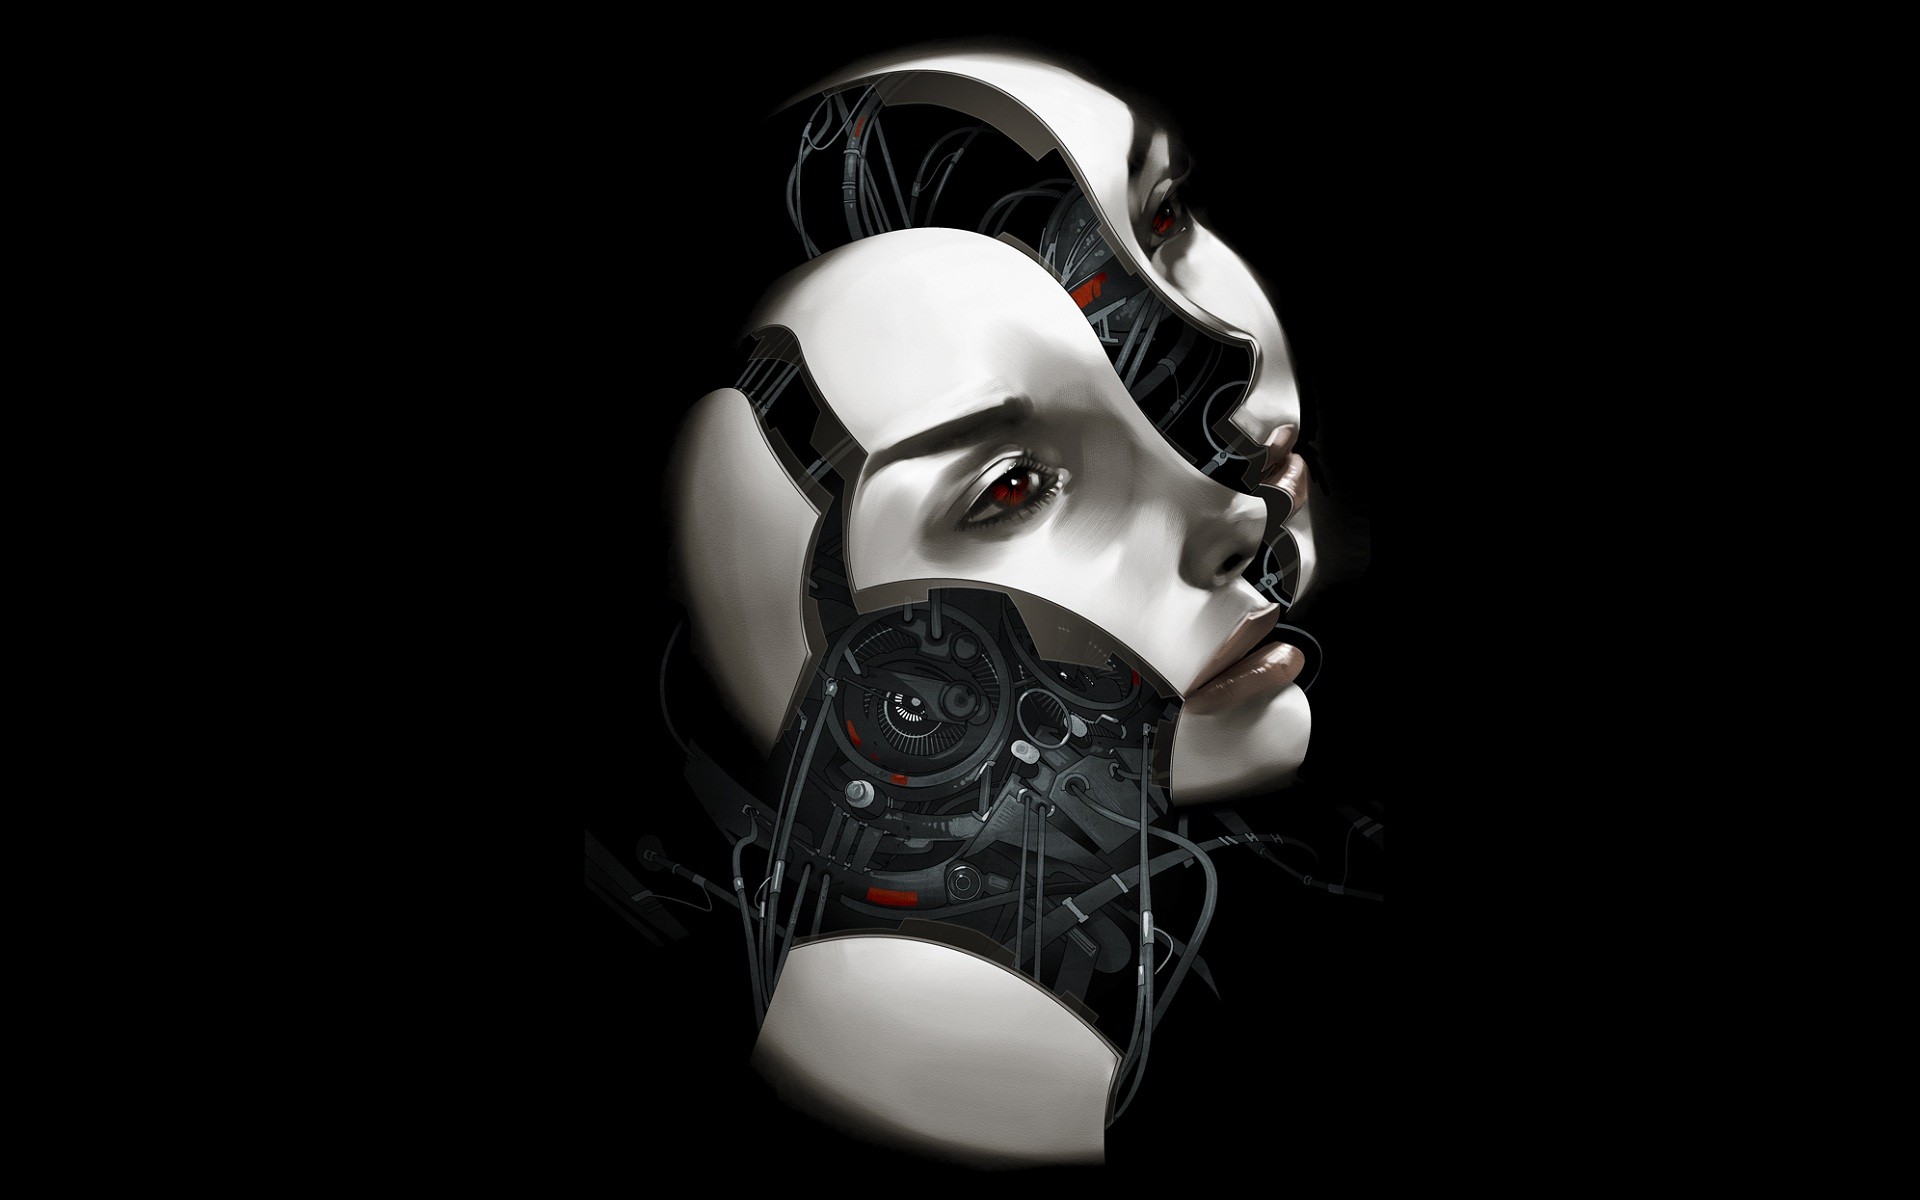 women, Face, Ann Leckie, Digital Art, Black Background, Minimalism, Robot, Androids, Technology, Wires, Book Cover, Science Fiction, Machine Wallpaper